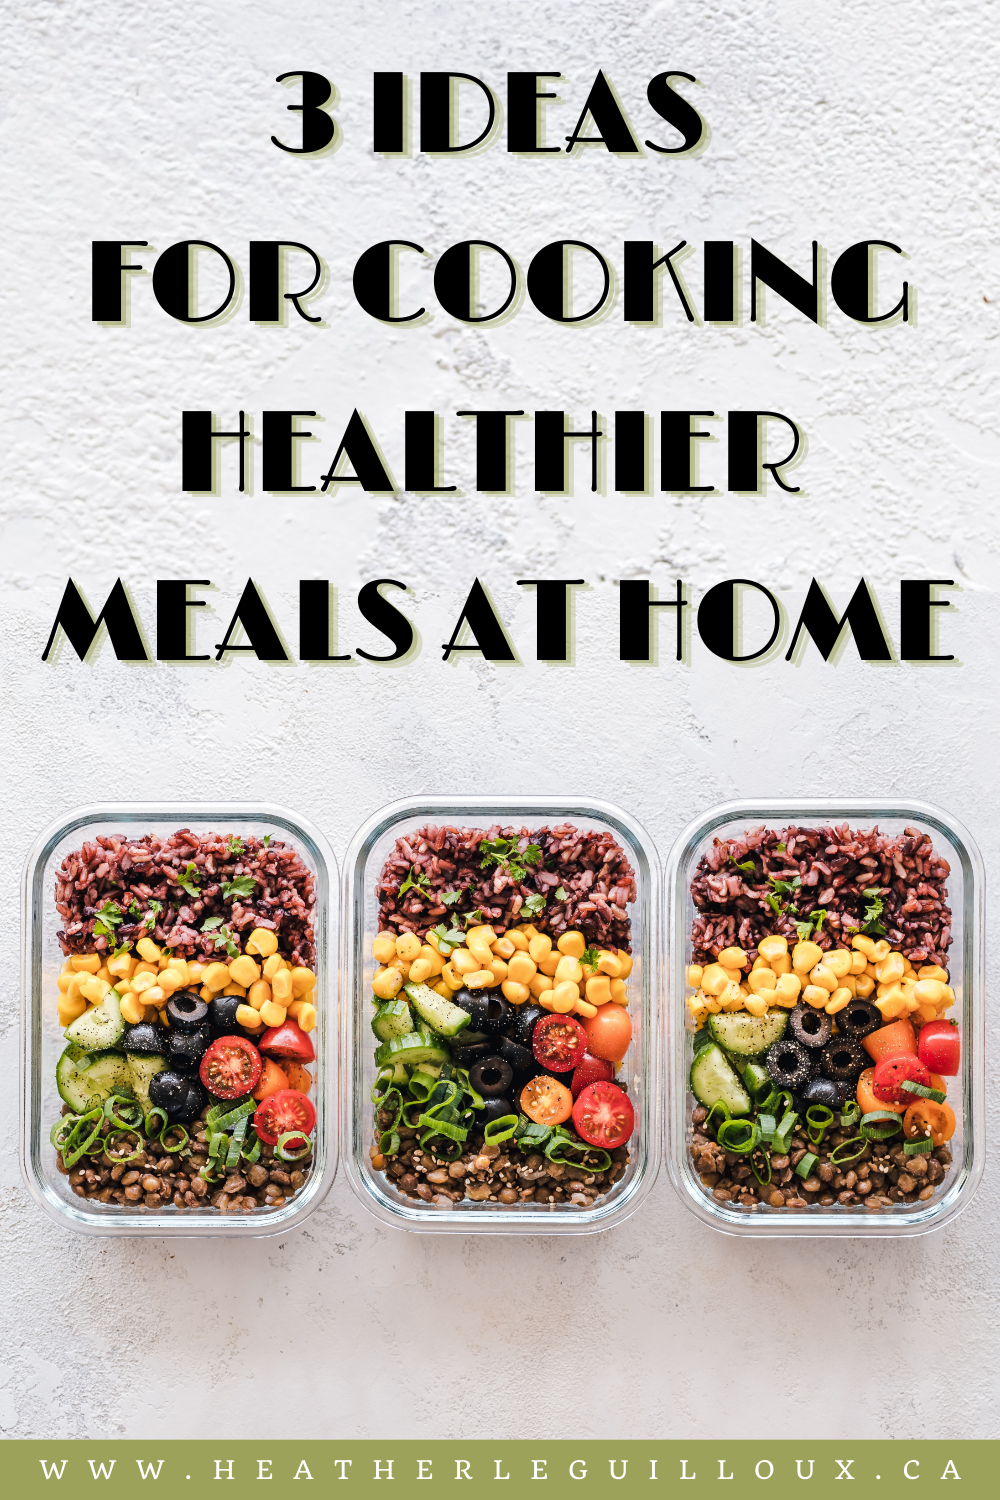 Eating out or ordering food delivery service can have serious health consequences in the long run, so finding easy ways of cooking at home can increase our overall health and well-being. Plus it can be a ton of fun to find new recipes to try out. Let's explore three ideas for cooking healthier meals at home. #healthymeals #homecooking #recipes